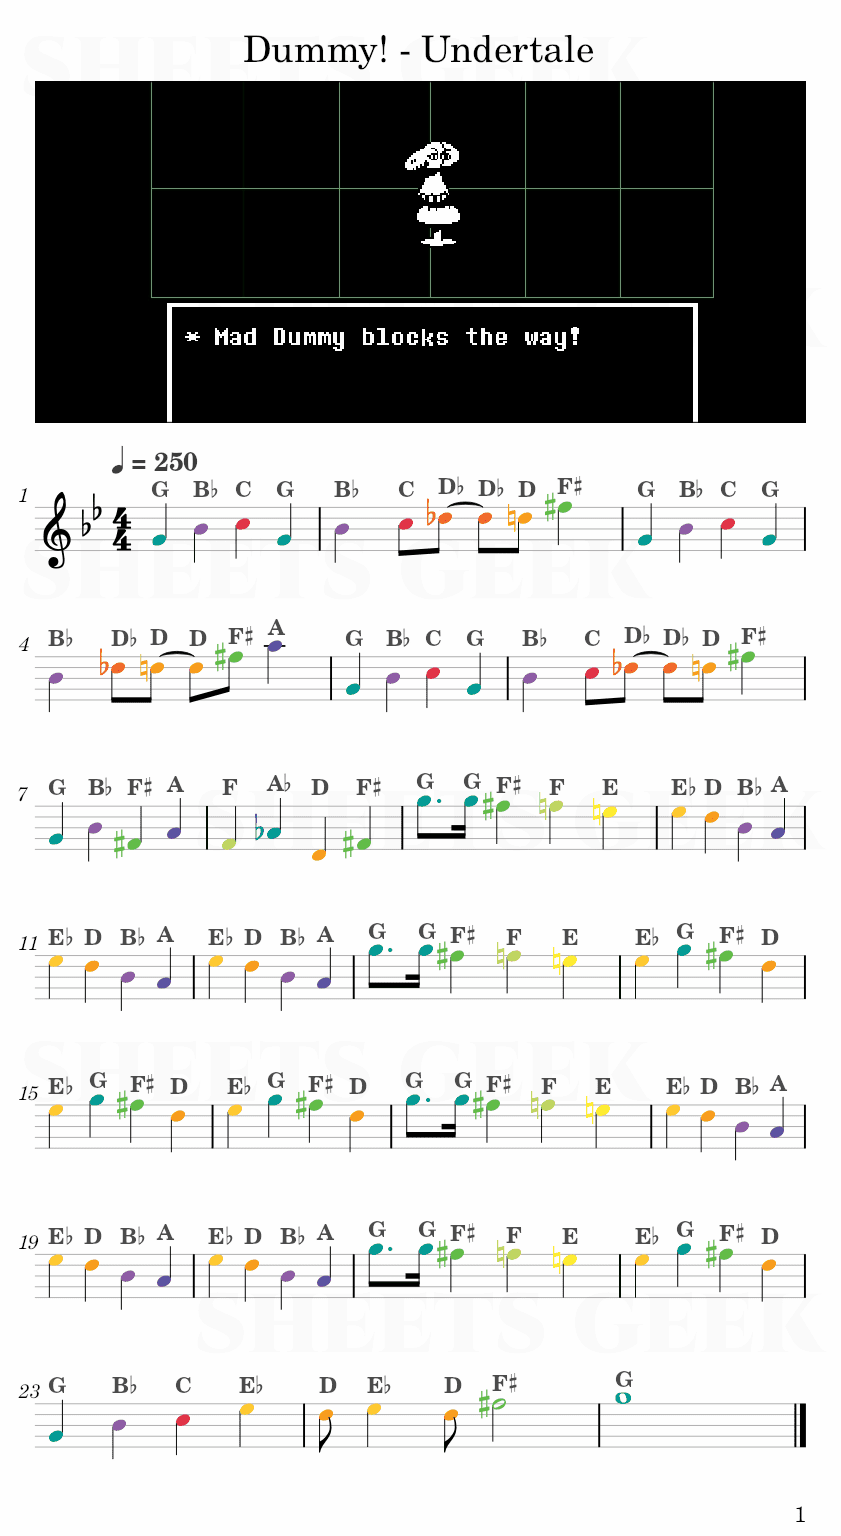 Dummy! - Undertale Easy Sheet Music Free for piano, keyboard, flute, violin, sax, cello page 1